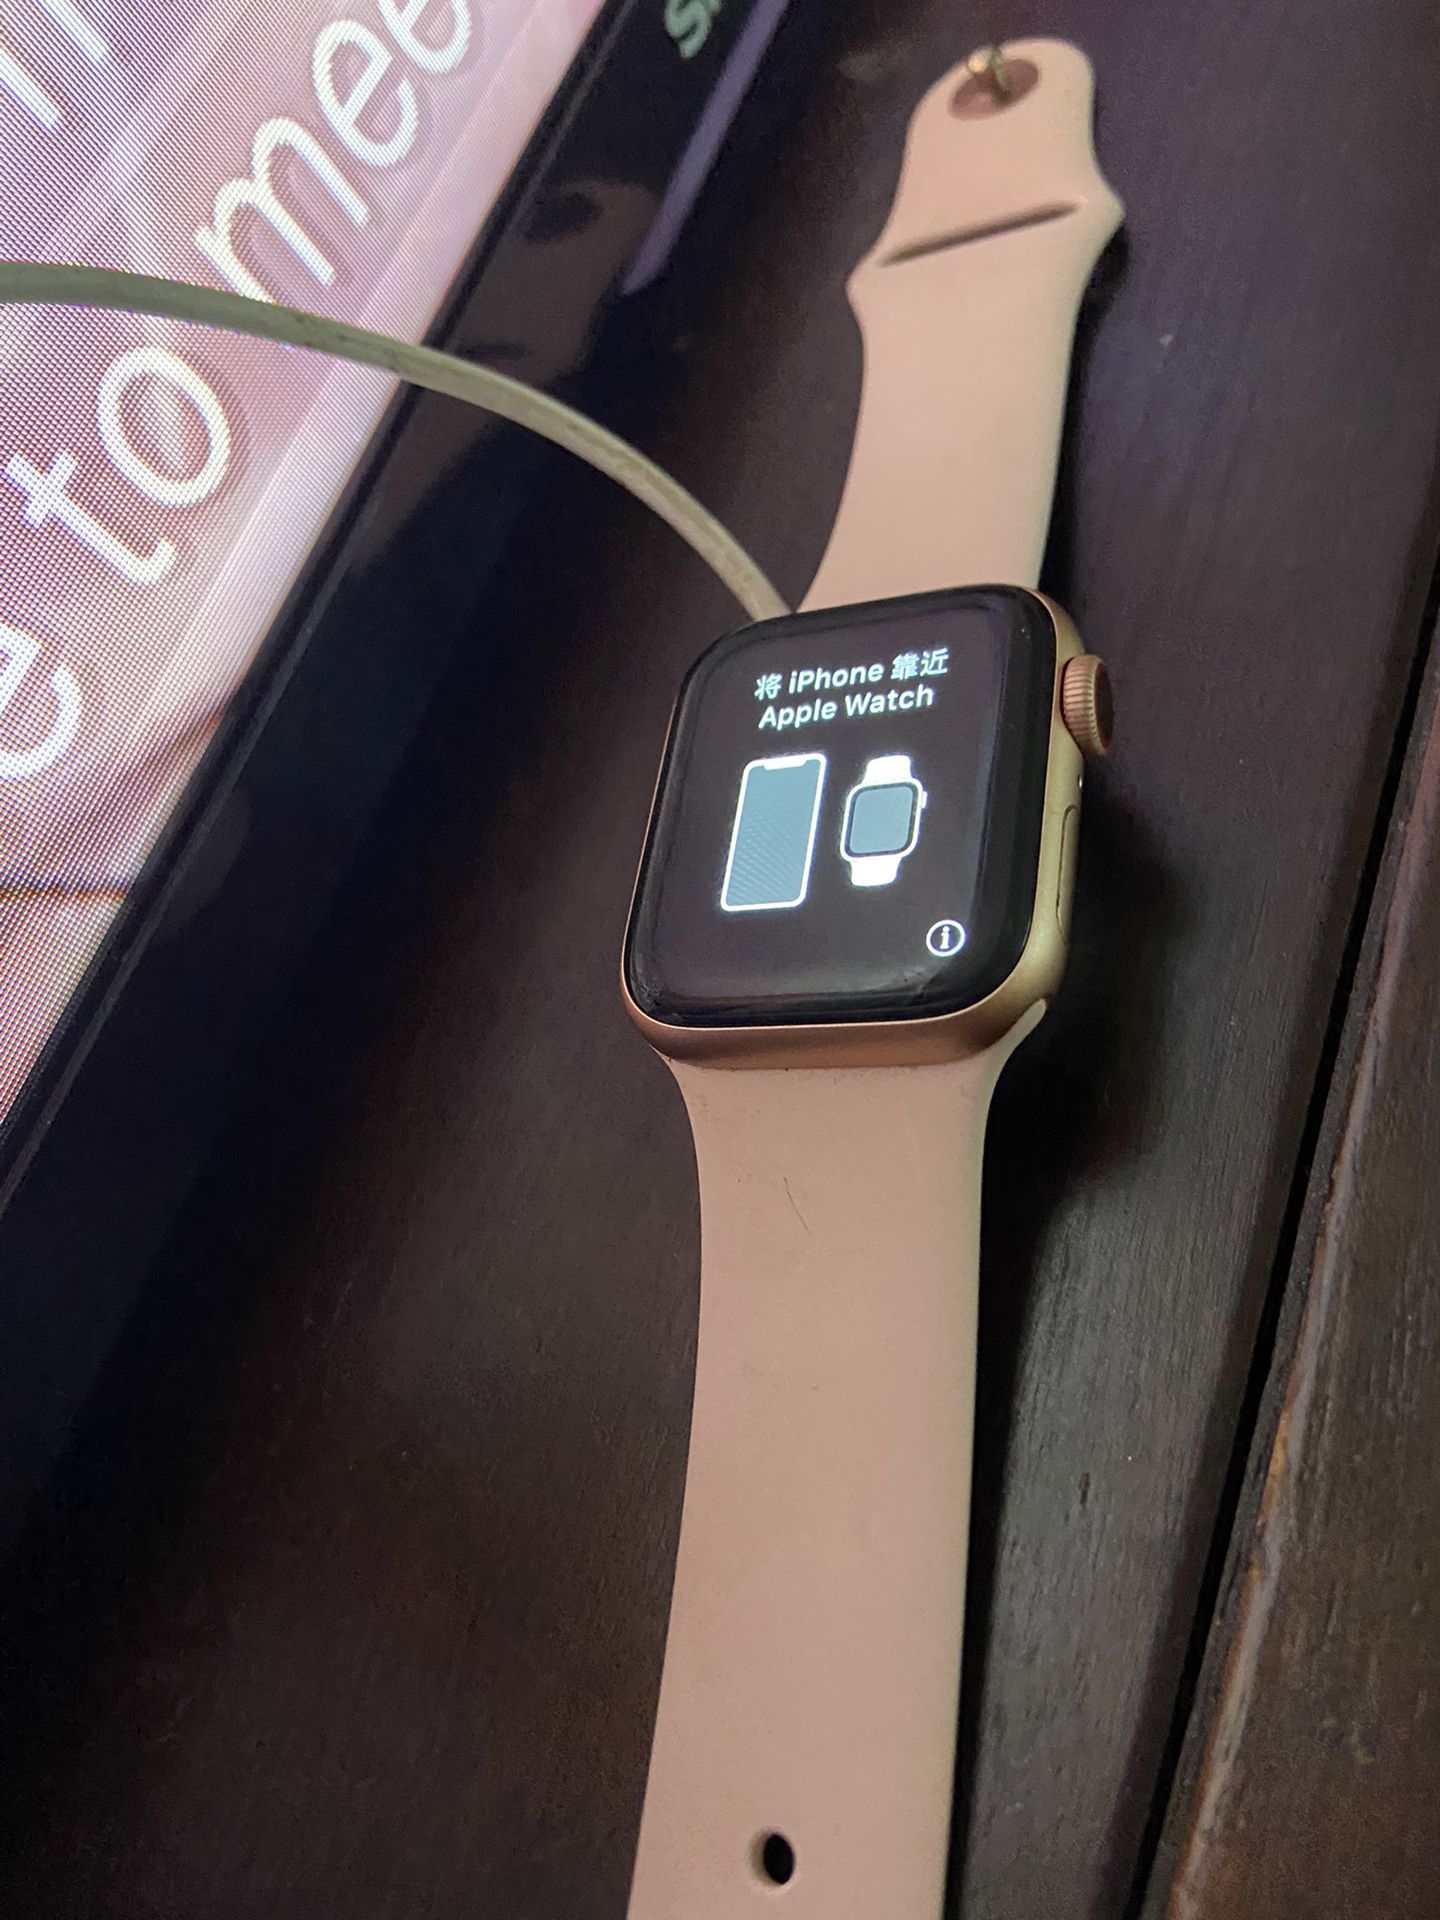 Barely used 4th generation Apple Watch w/ cell service